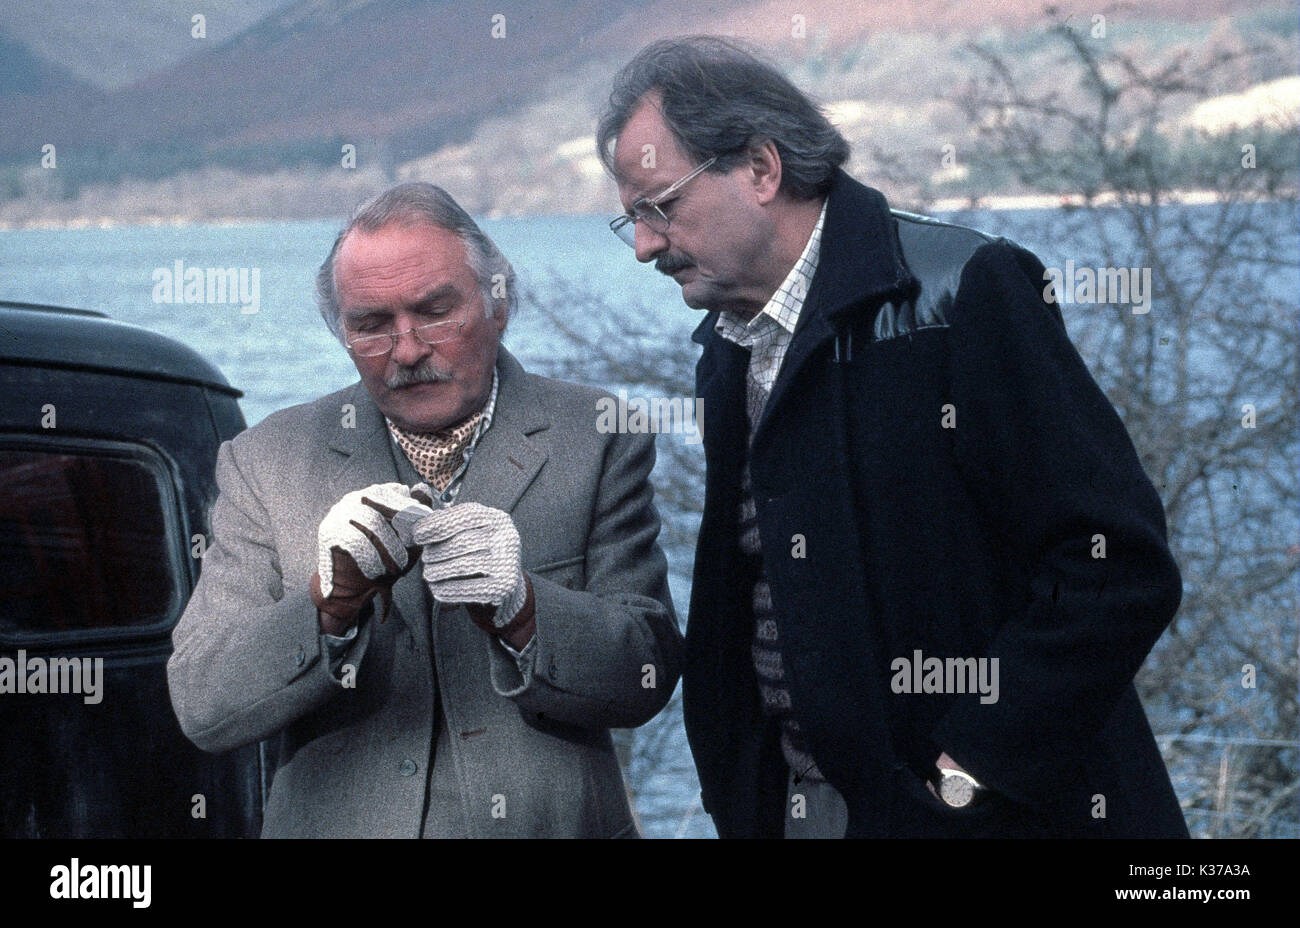 THE STEAL DINSDALE LANDON AND PETER BOWLES A WARNER BROS FILM     Date: 1994 Stock Photo